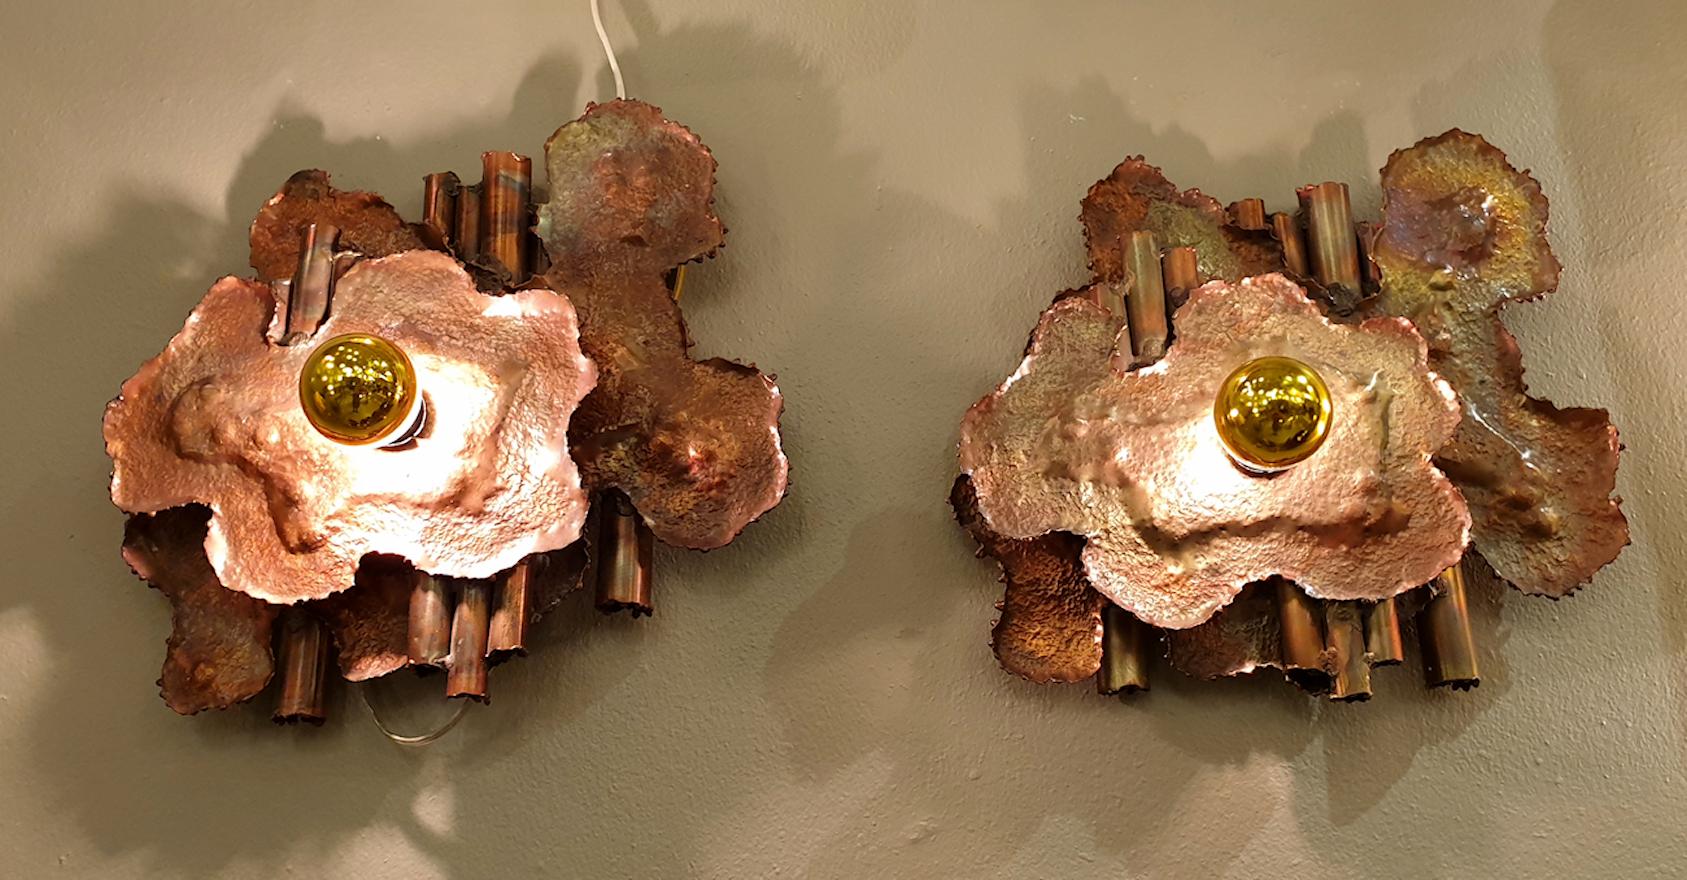 Pair of Mid-Century Modern artisan handmade brass sconces, Italy, 1970s.
Brass Acid treated wall sconces. Brutalist style. One of a kind design.
1 light each, rewired for the US.
Excellent condition.